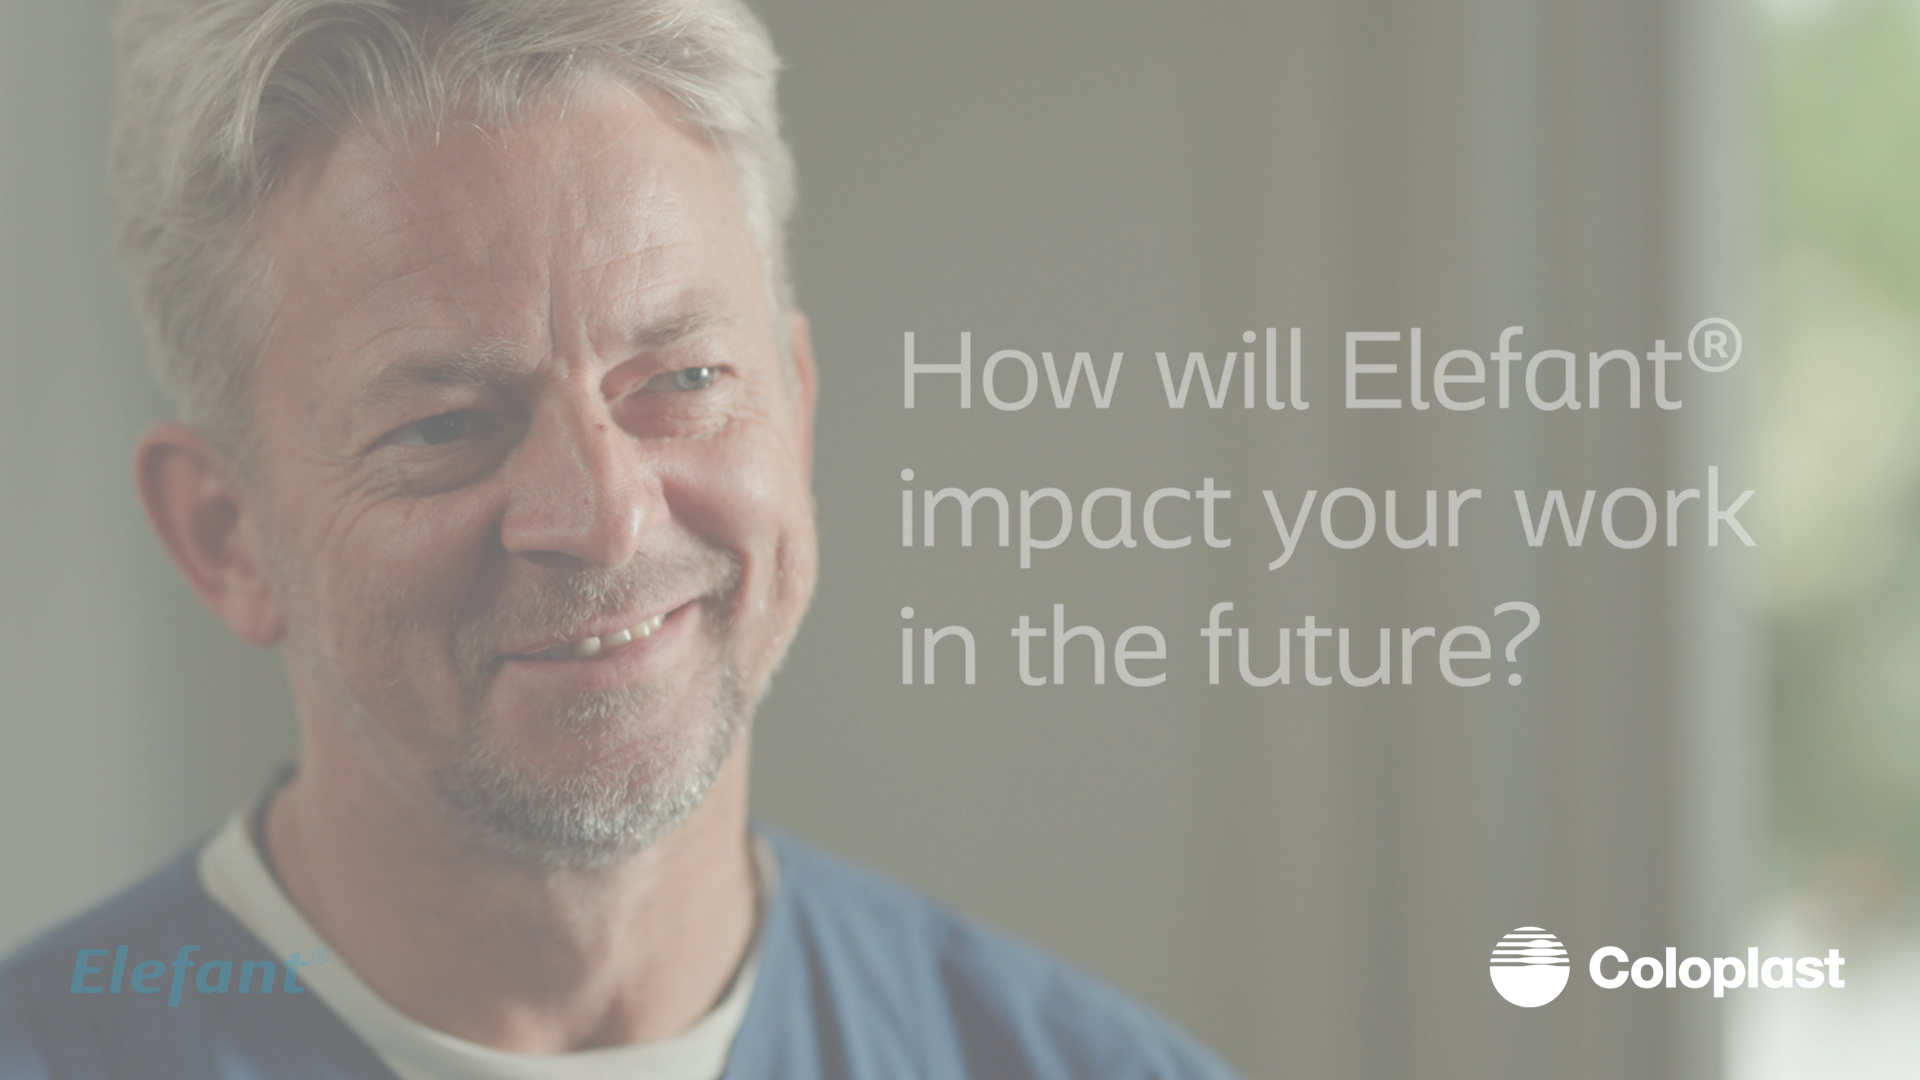 how Elefant will impact your work in the future?